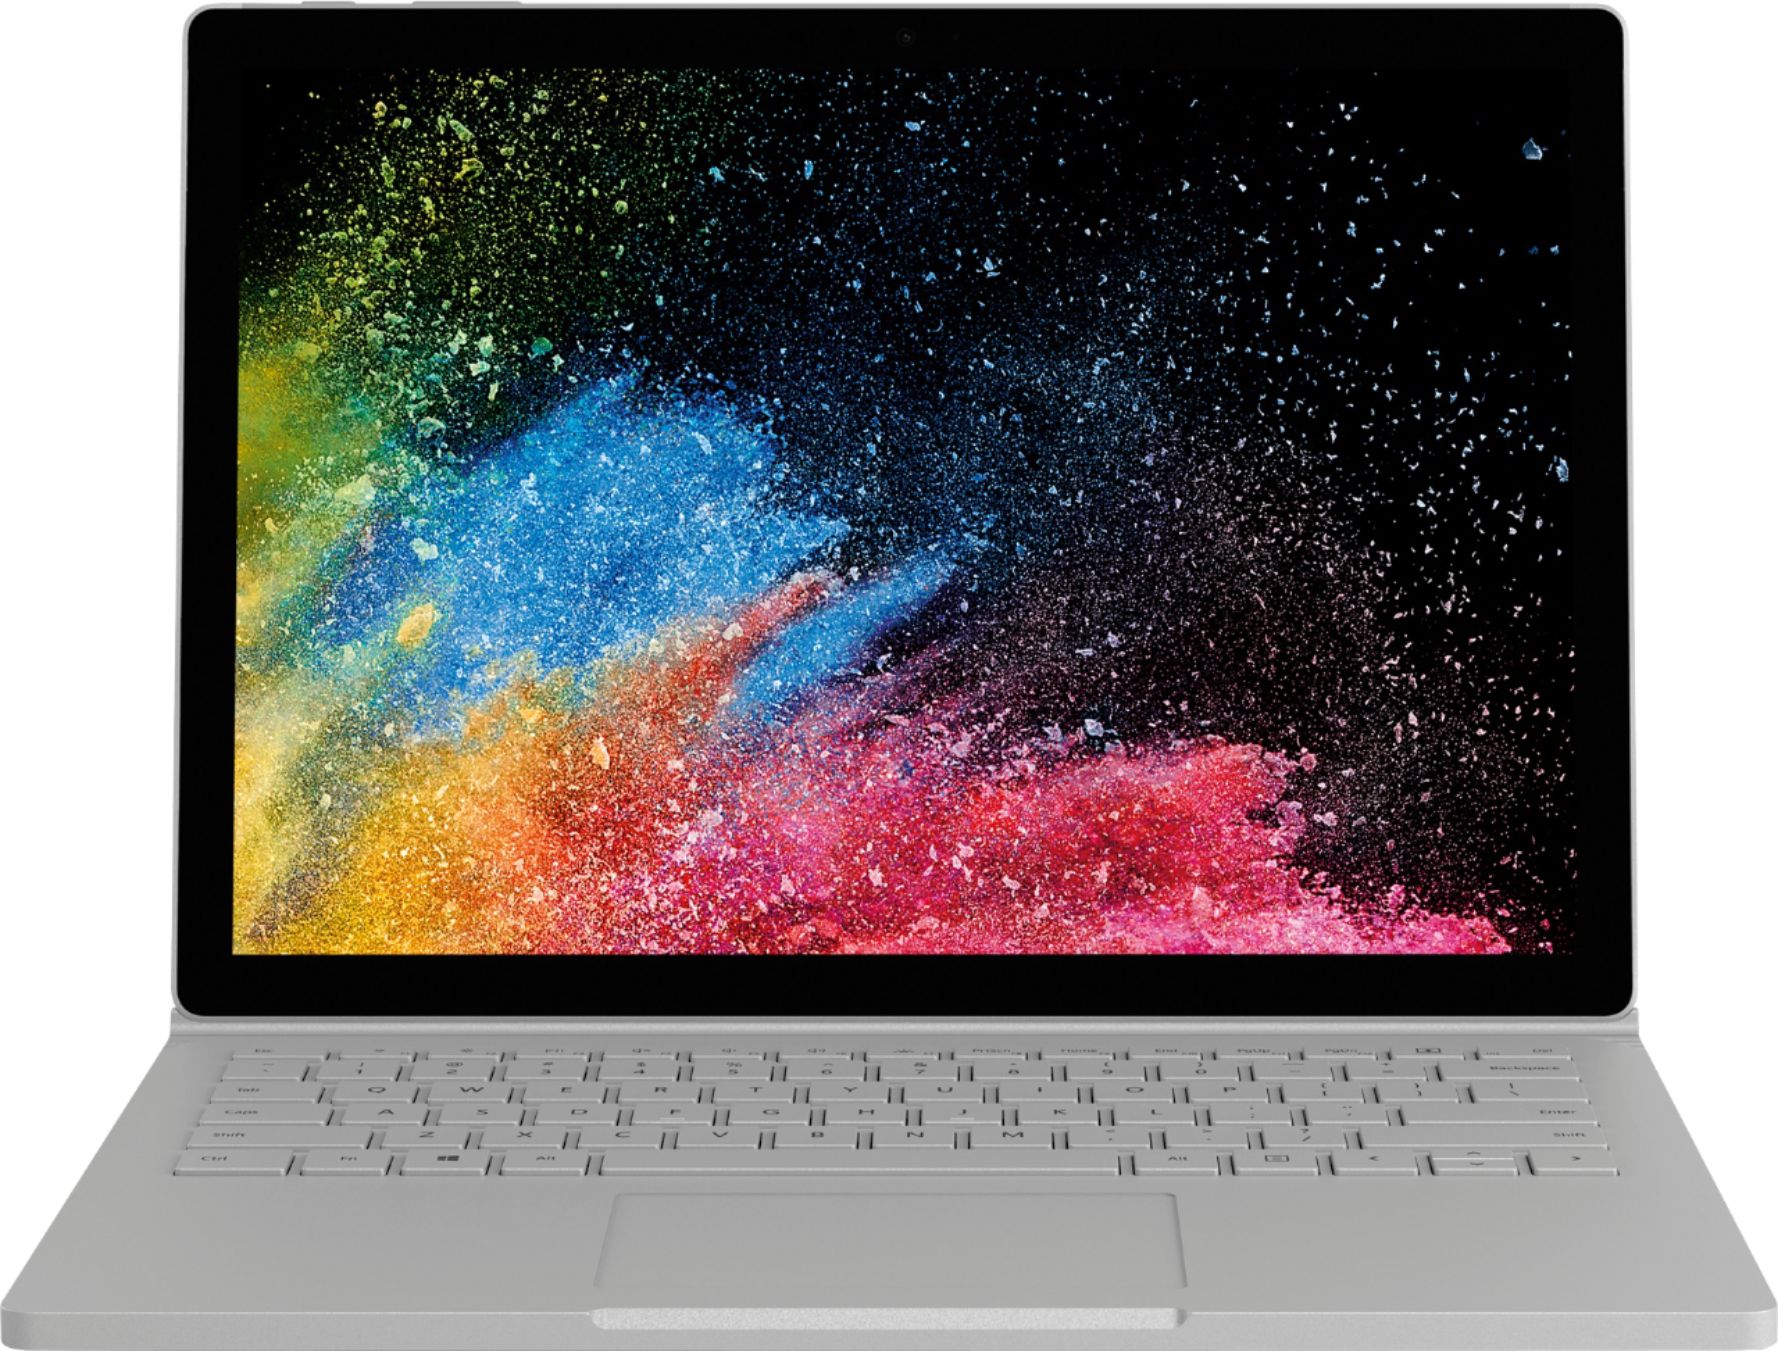 Angle View: Microsoft - Geek Squad Certified Refurbished Surface Laptop 3 13.5" Touch-Screen - Intel Core i7 - 16GB Memory - 512GB SSD